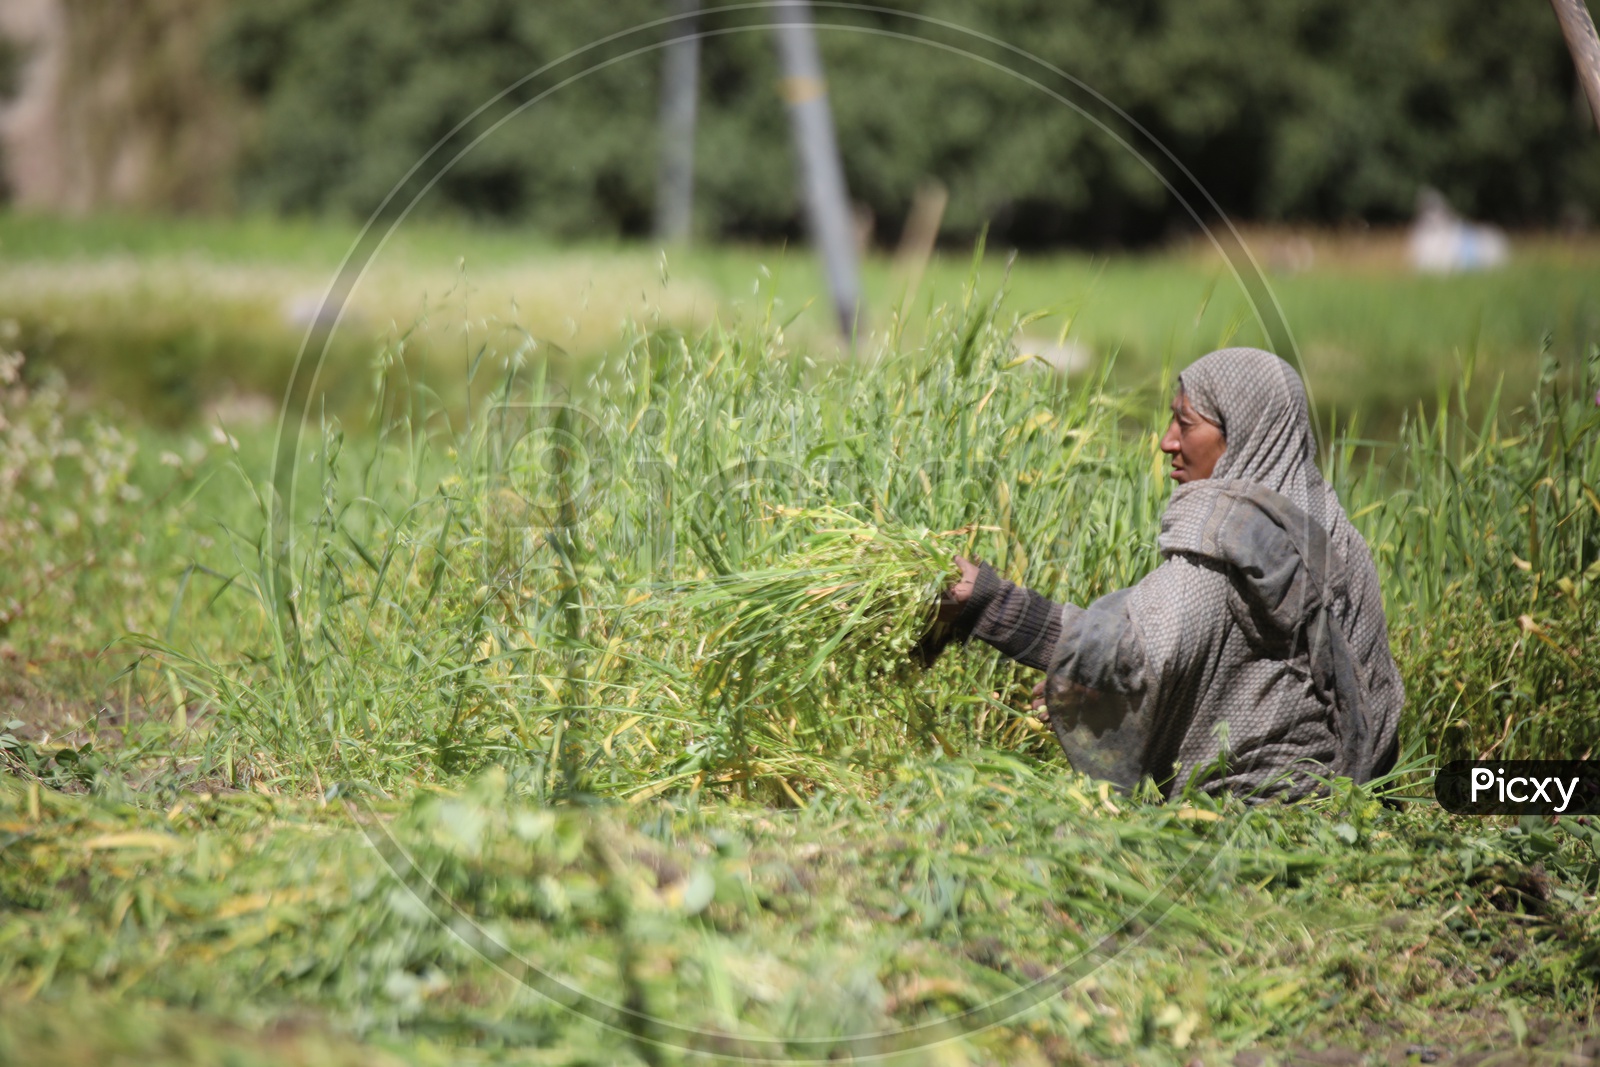 A women farmer working in agriculture field